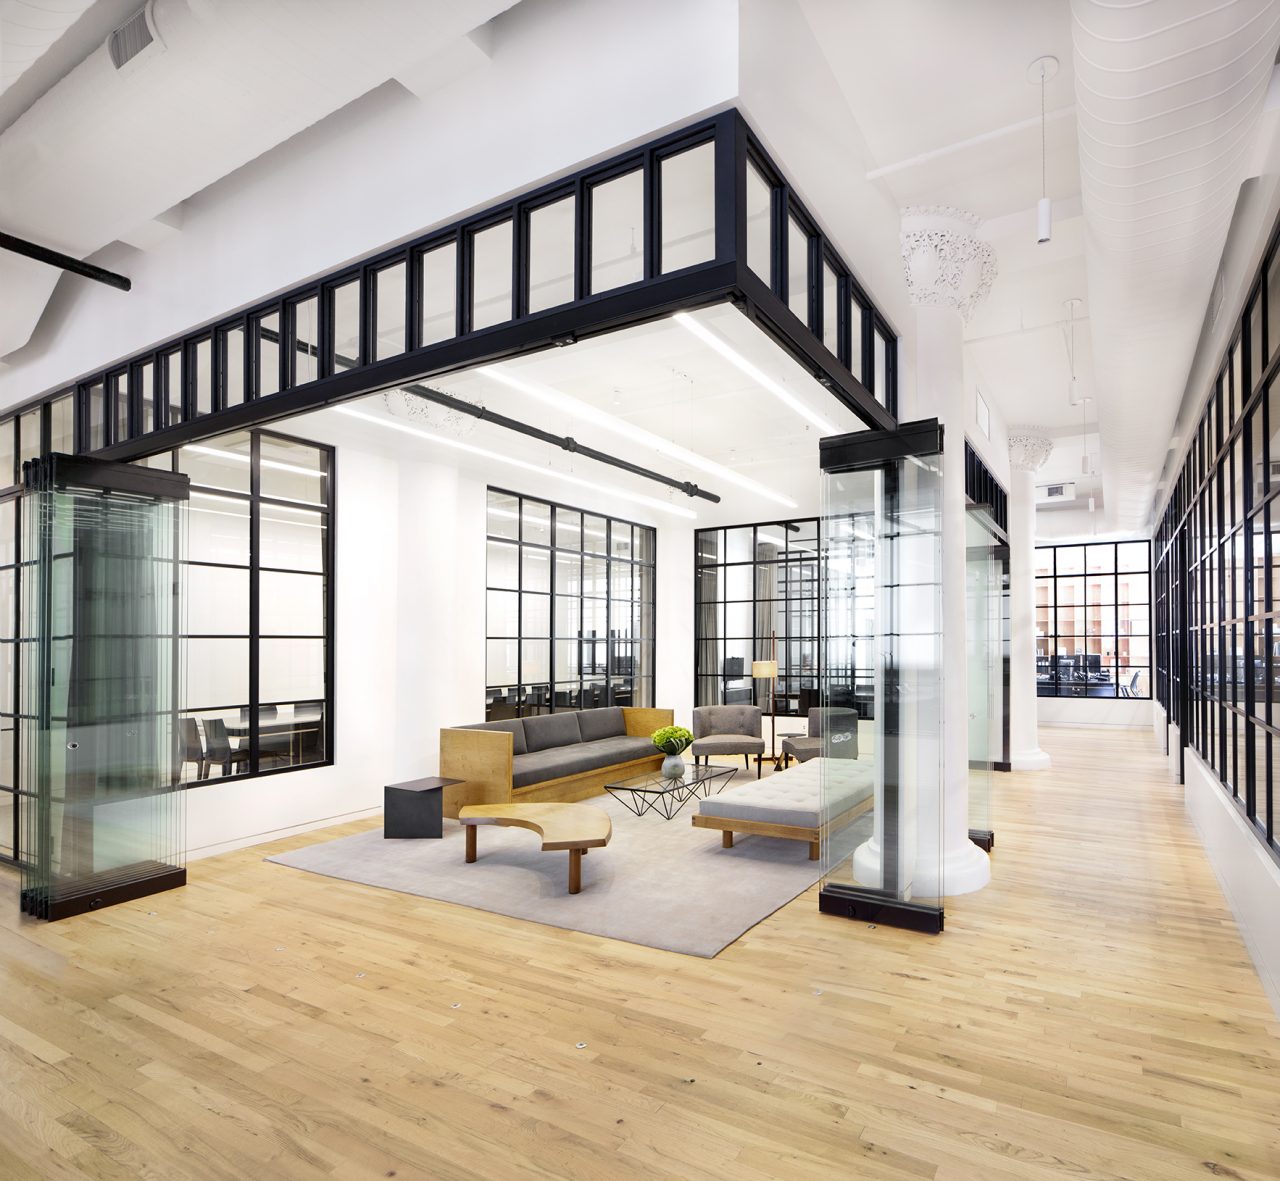 Interior view of Bleecker Street Office, New York (tacklebox architecture).